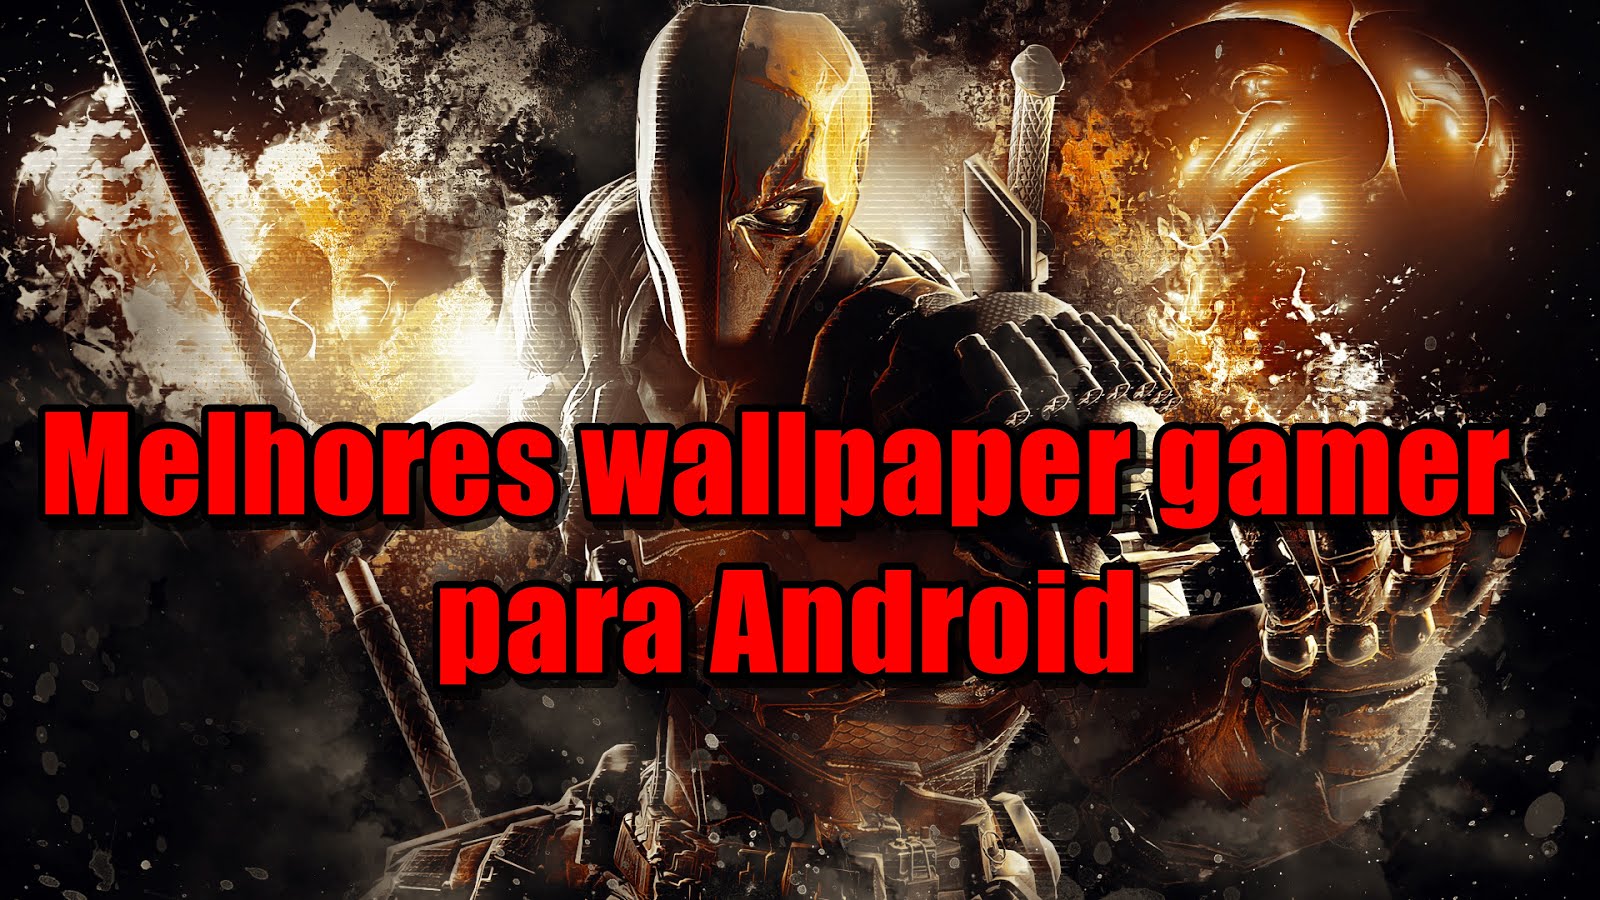 melhores wallpapers para android,action adventure game,movie,strategy video game,action film,cg artwork